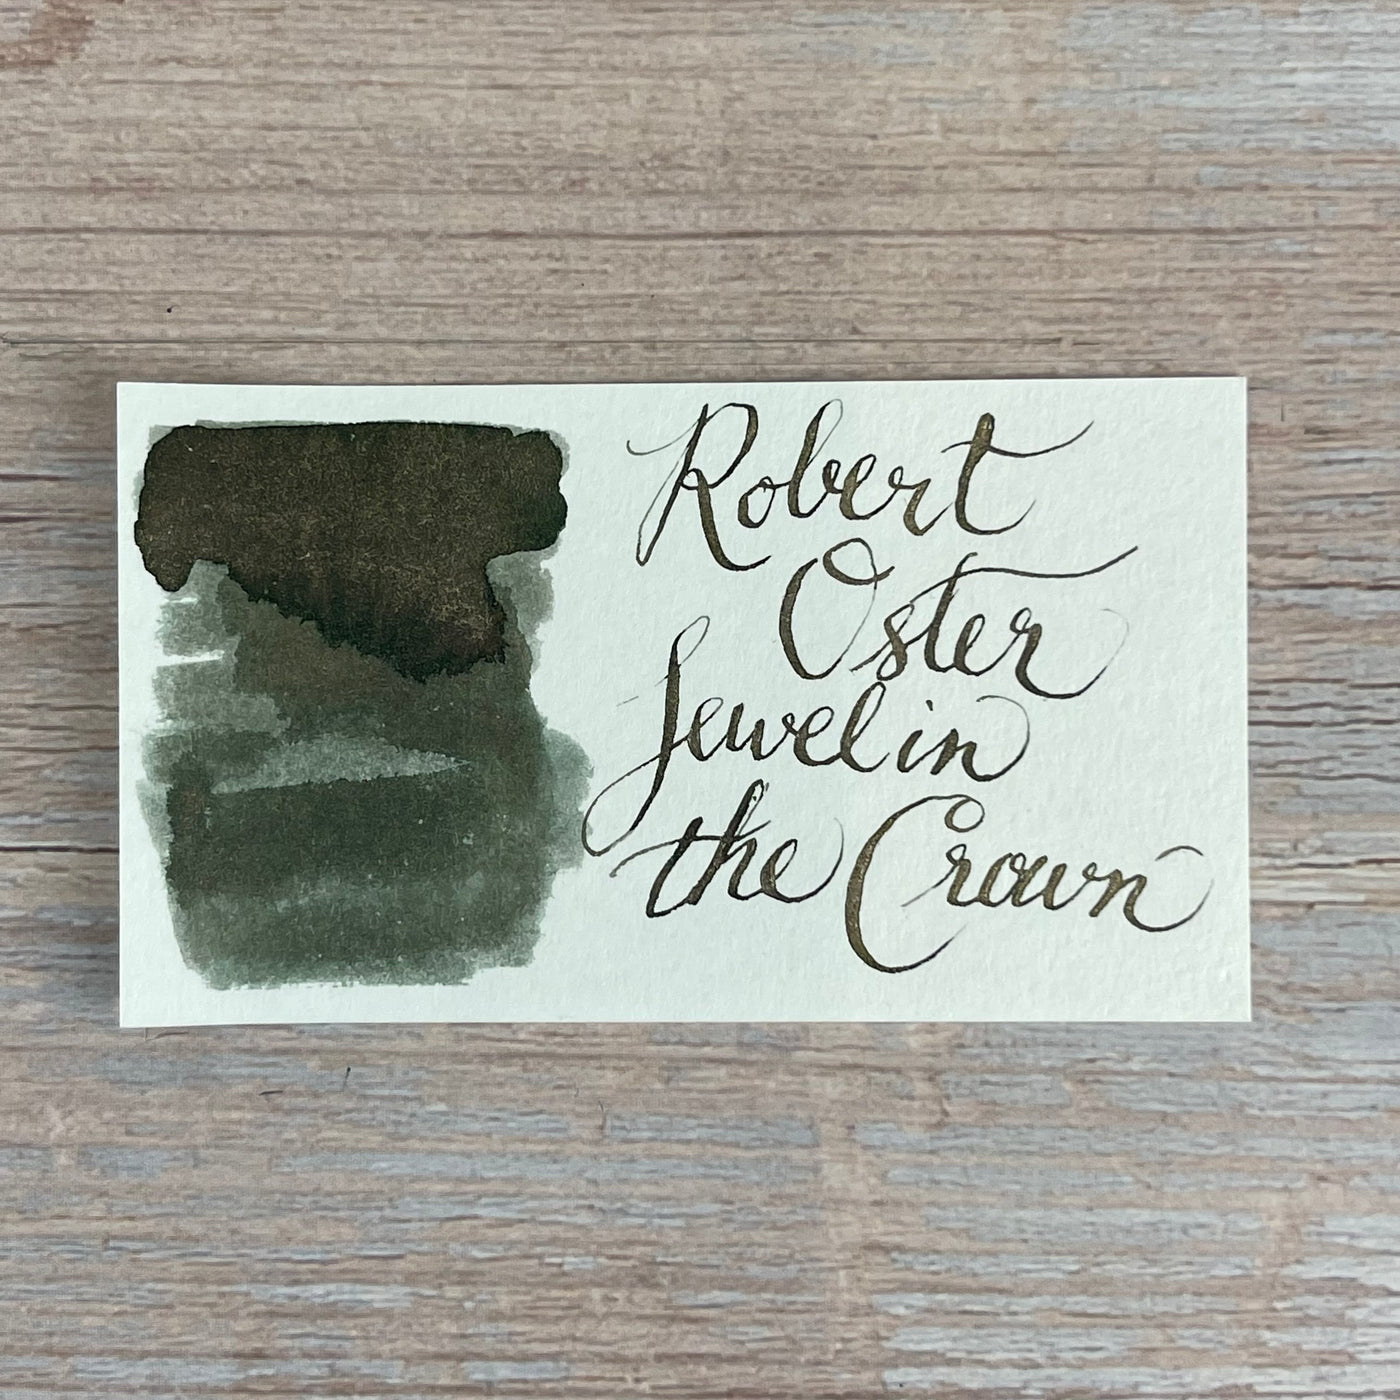 Robert Oster Jewel in the Crown - 50ml Bottled Ink